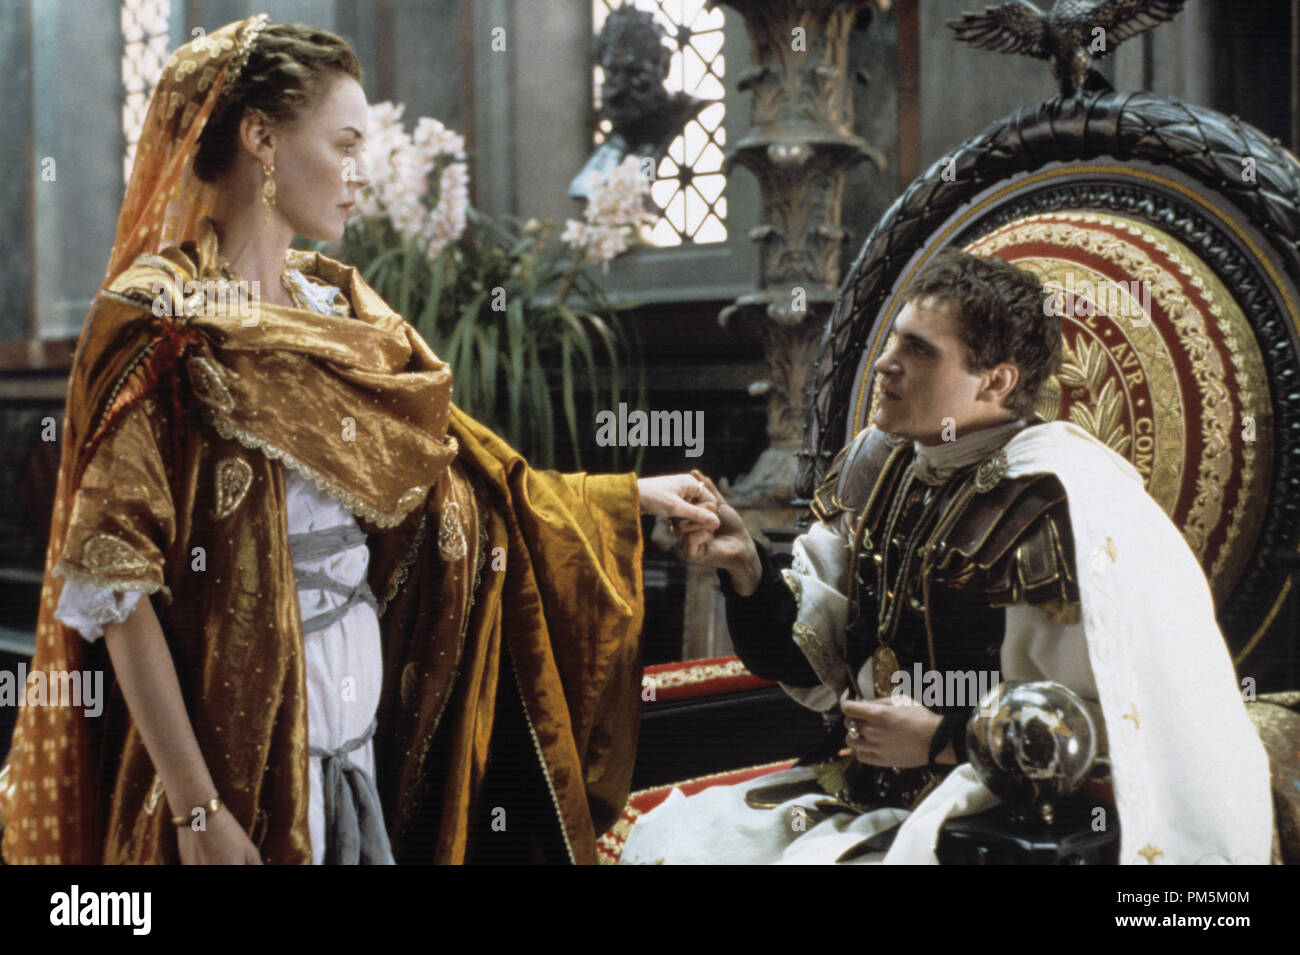 Film Still / Publicity Stills from 'Gladiator' Connie Nielsen, Joaquin Phoenix © 2000 Universal  Photo Credit: Jaap Buitendijk  File Reference # 30846517THA  For Editorial Use Only -  All Rights Reserved Stock Photo